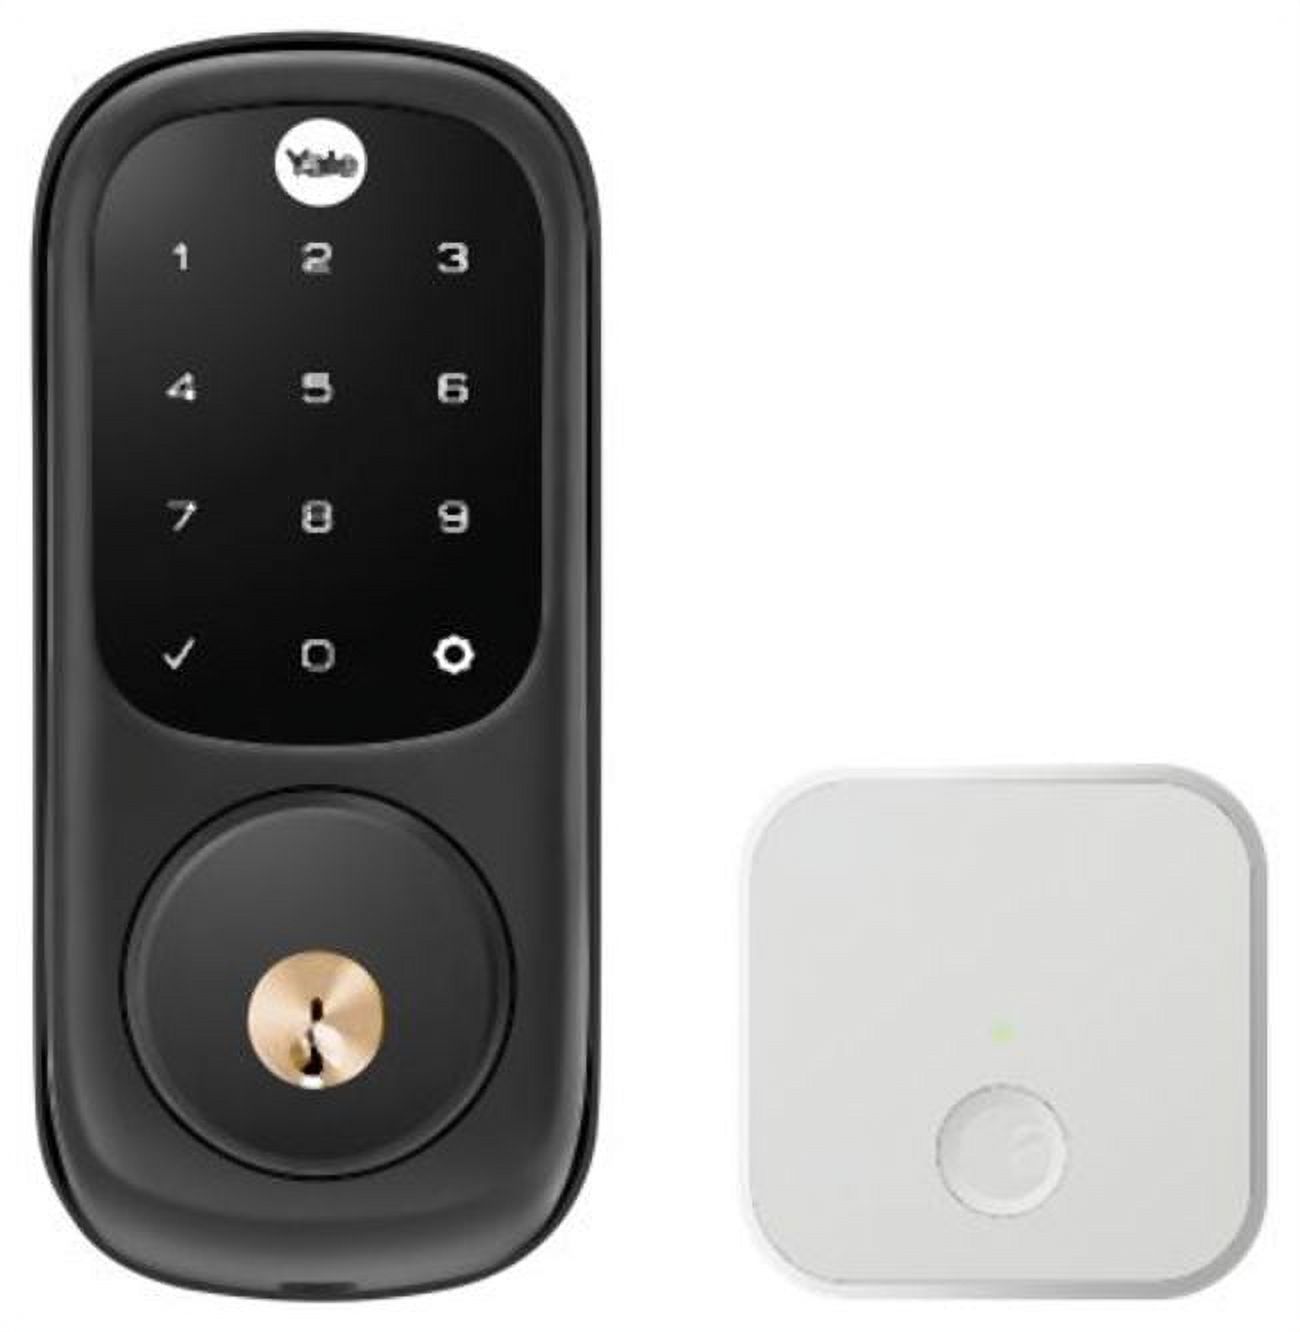 Yale YRD226-CBA-BSP Wi-Fi & BLE Assure Lock Touchscreen Deadbolt, Black Suede - image 2 of 7